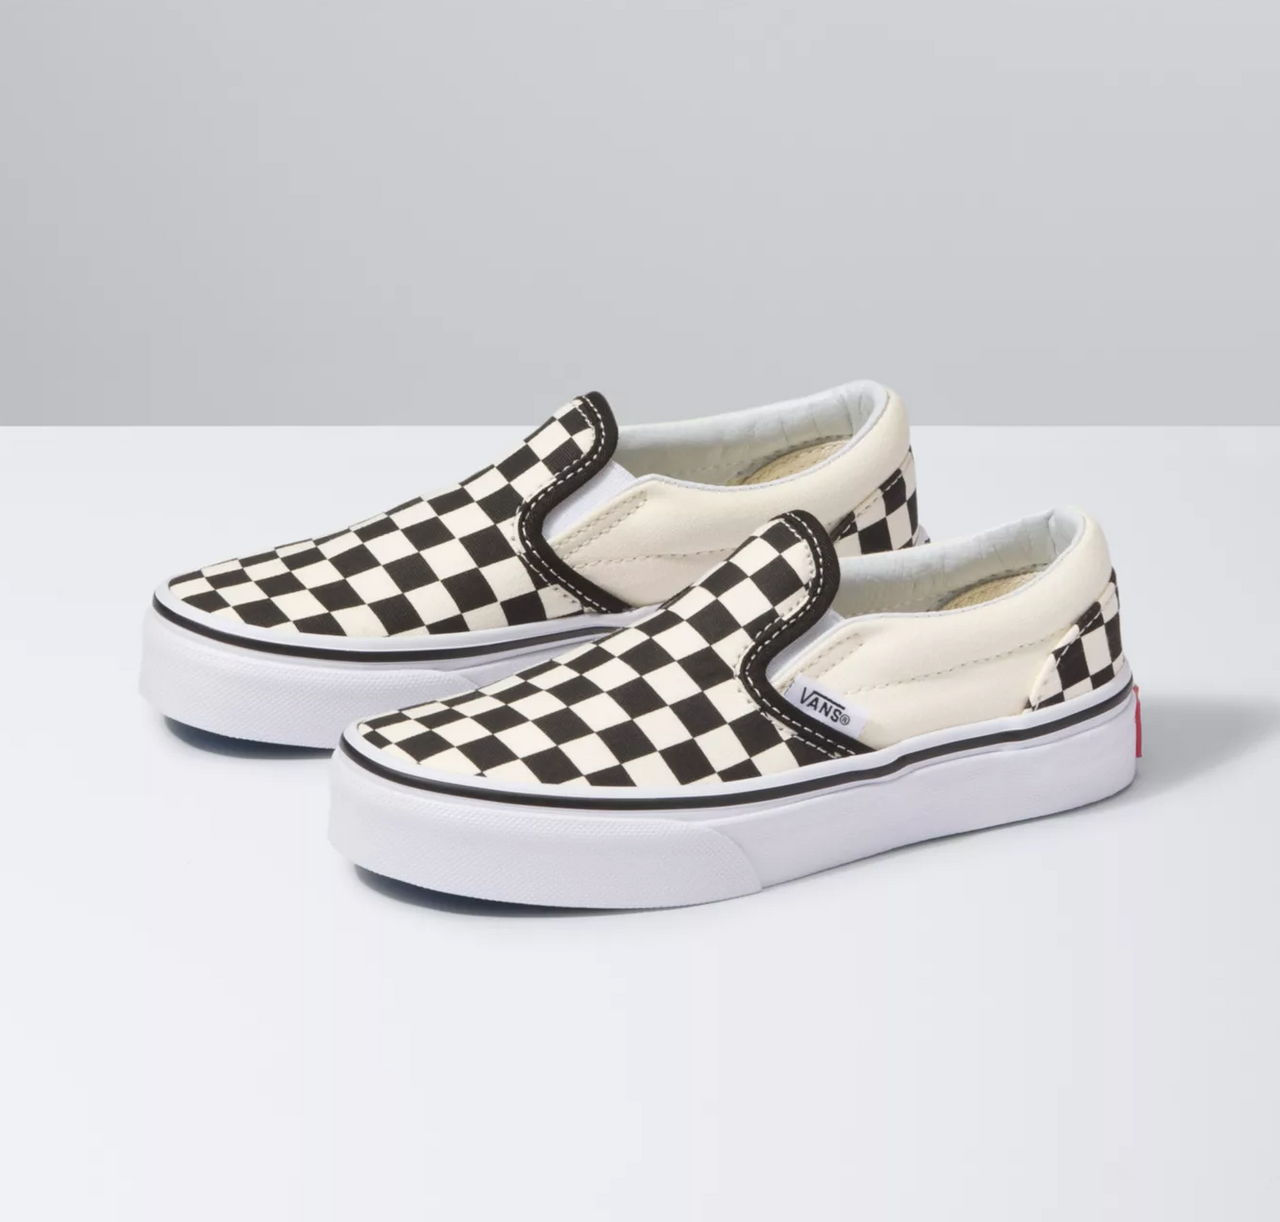 Vans Youth Classic Slip On Checkerboard Shoe - Black / White